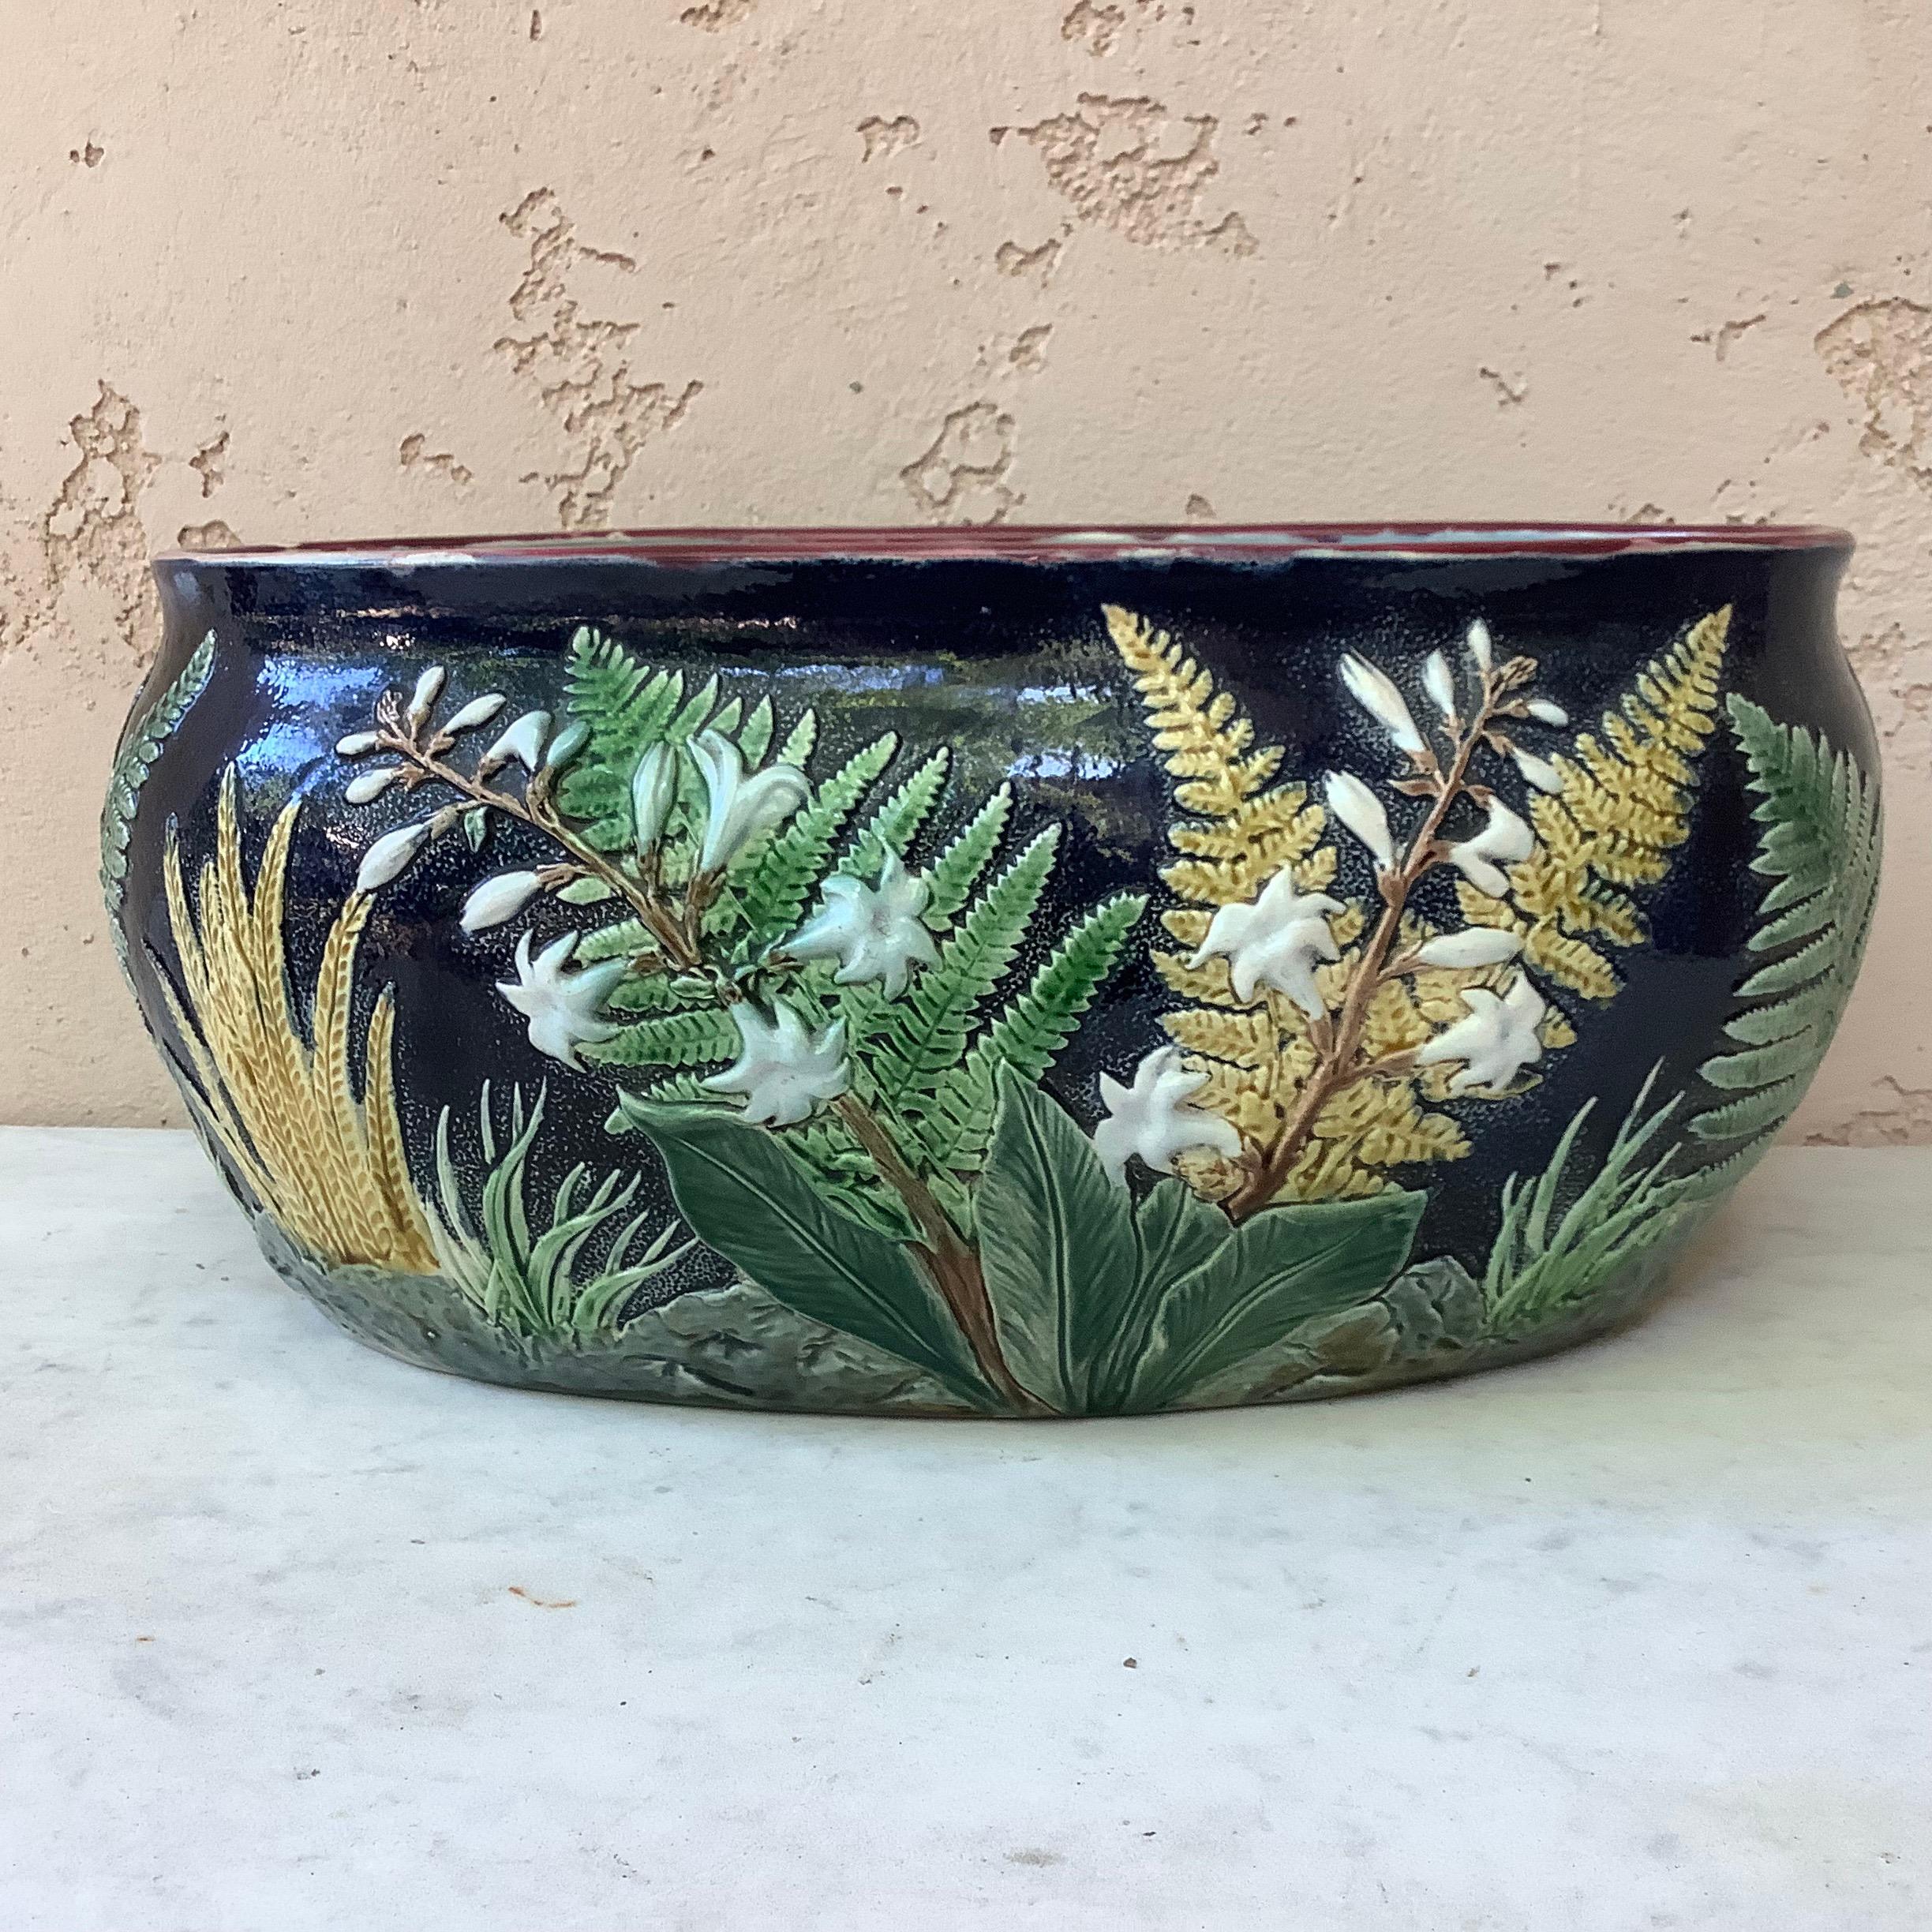 Rare English Victorian Majolica fern & flowers Jardiniere signed Joseph Holdcroft, circa 1880.
The 2 sides are different one side have pink flowers the other white flowers , the background is cobalt blue with leaves and large ferns.